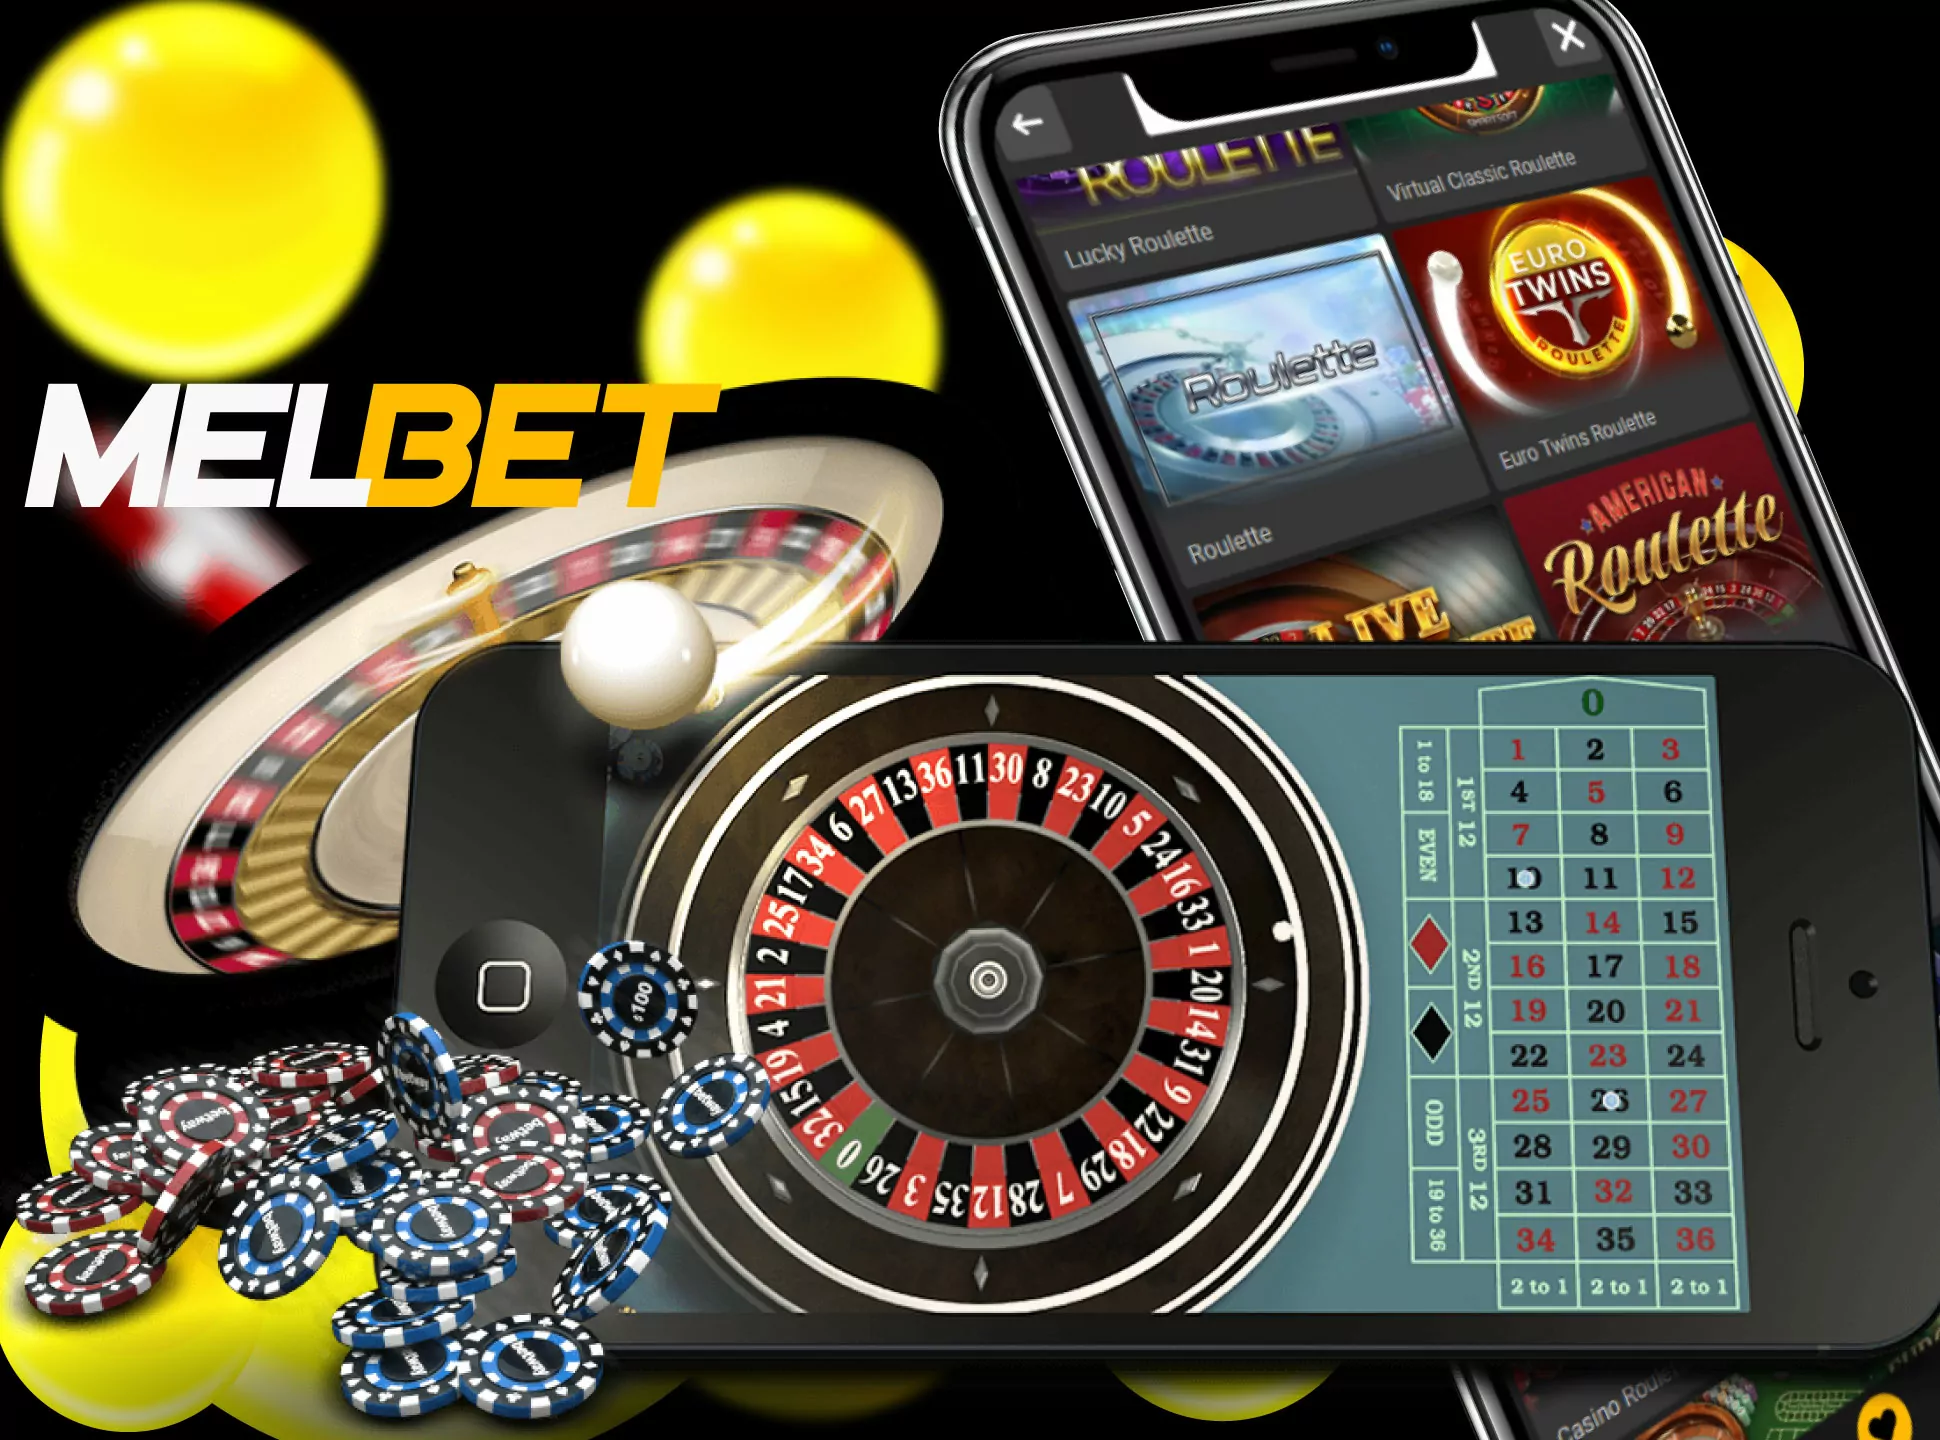 Spin roulette for big winnings.